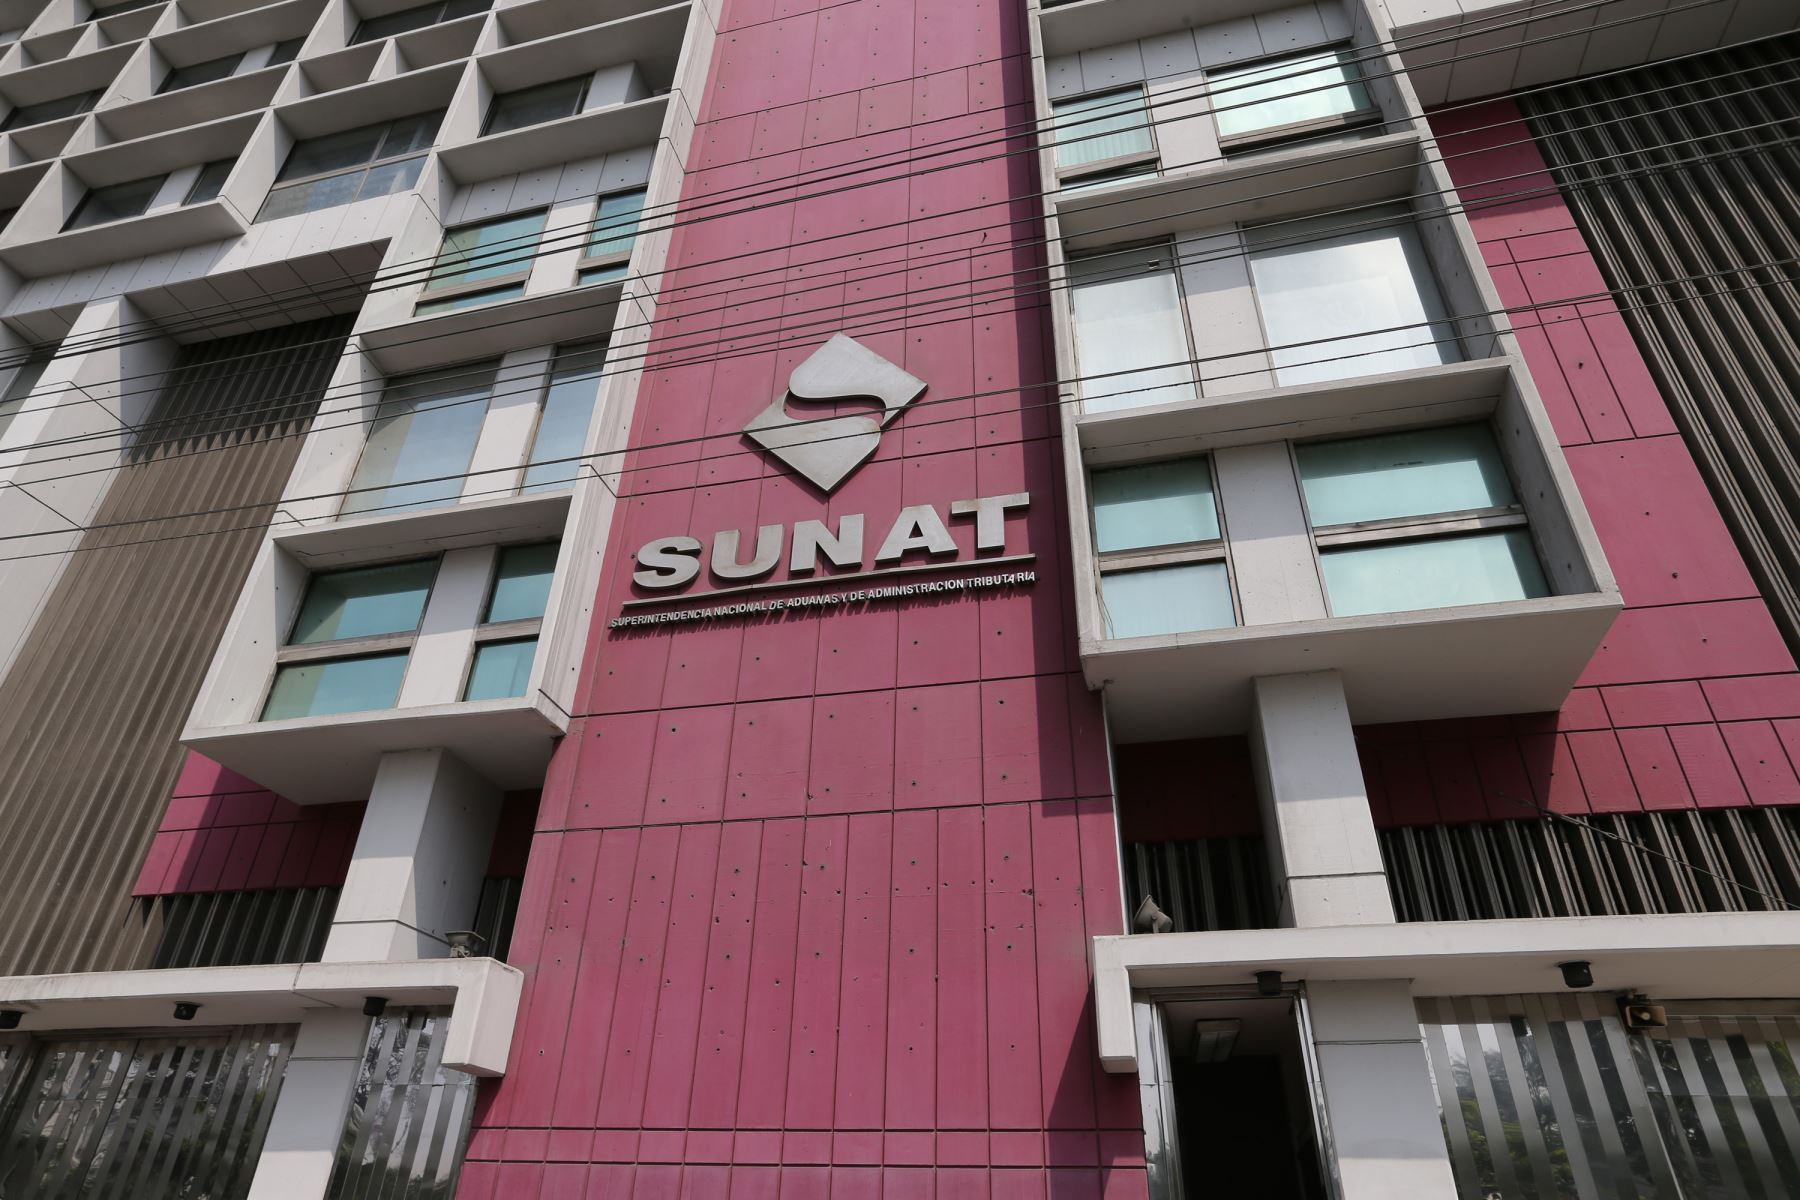 Sunat: more than 188,000 workers have already received an ex officio refund of the 2022 income tax